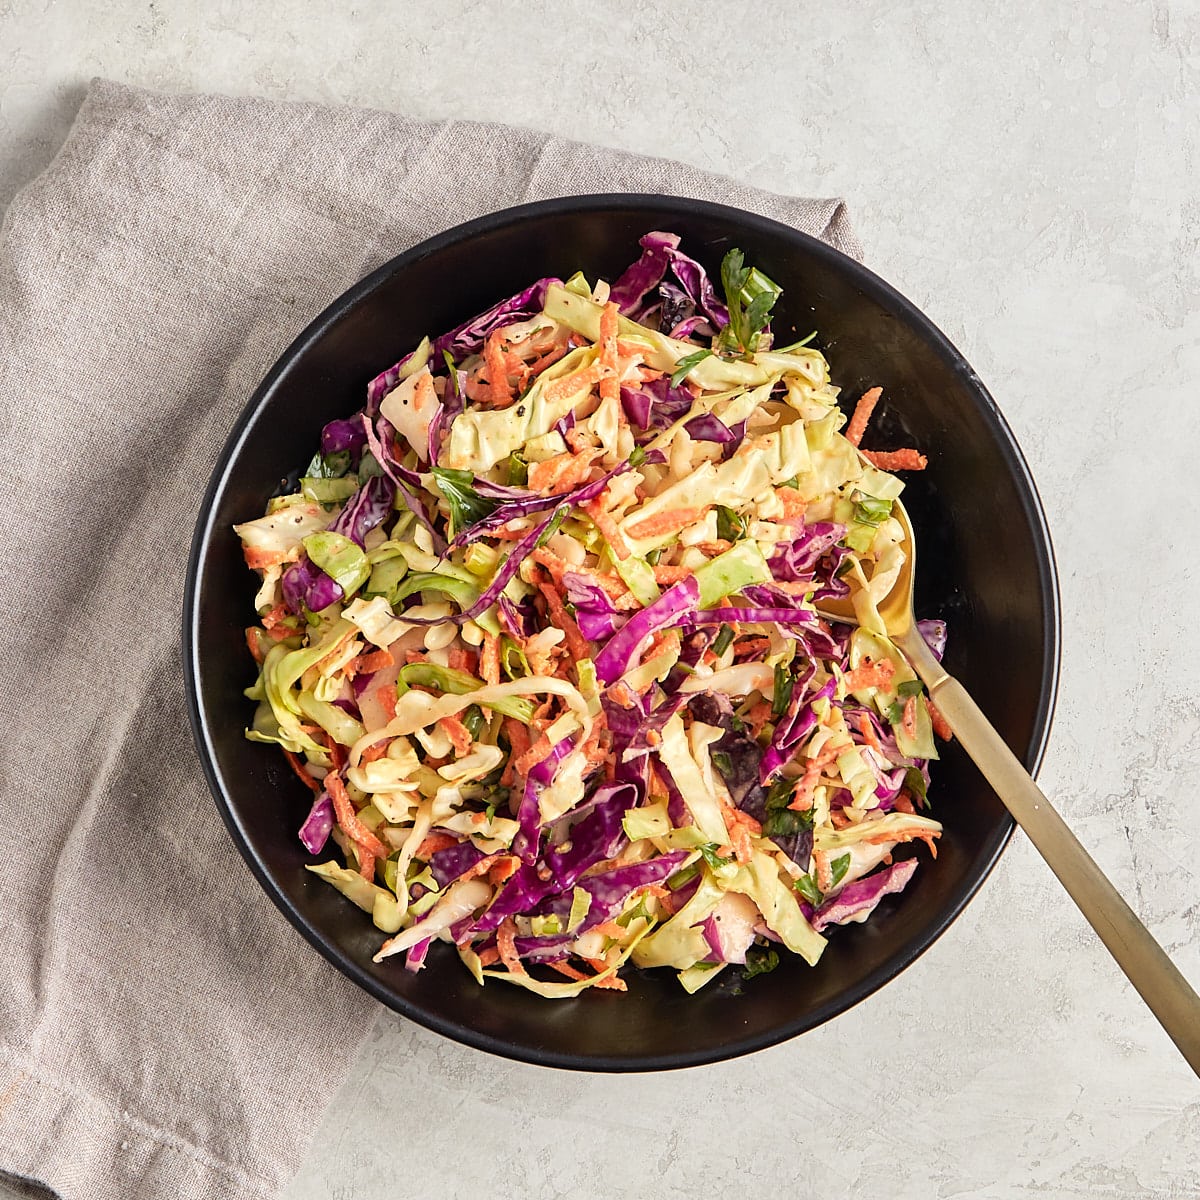 coleslaw in a bowl with a serving spoon.